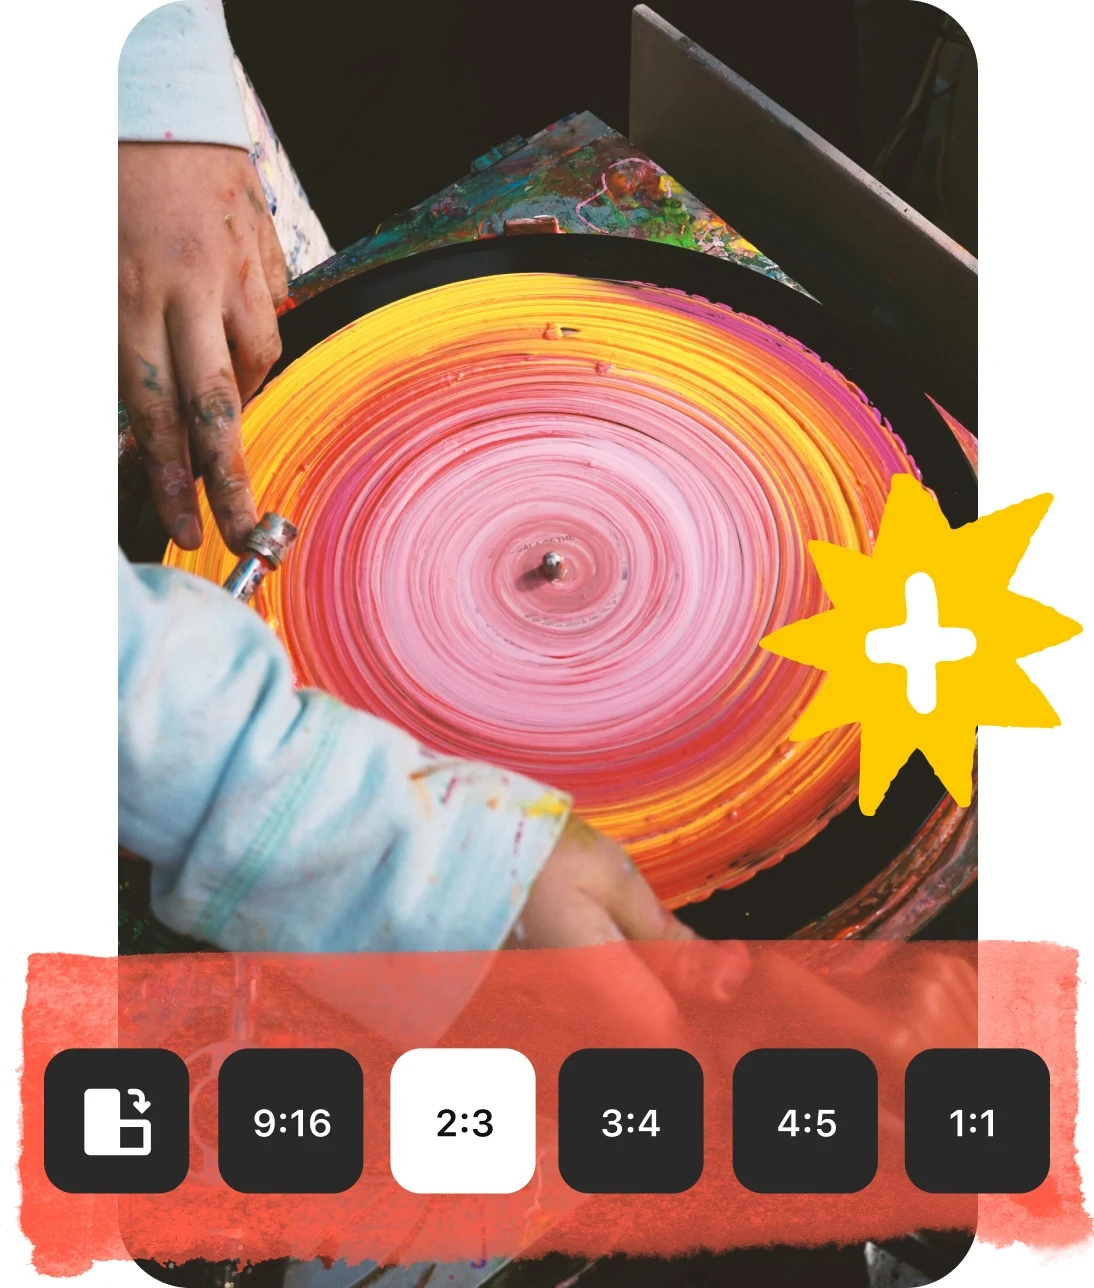 Collage of Pin sizes icons and an image of hands spinning a painted record